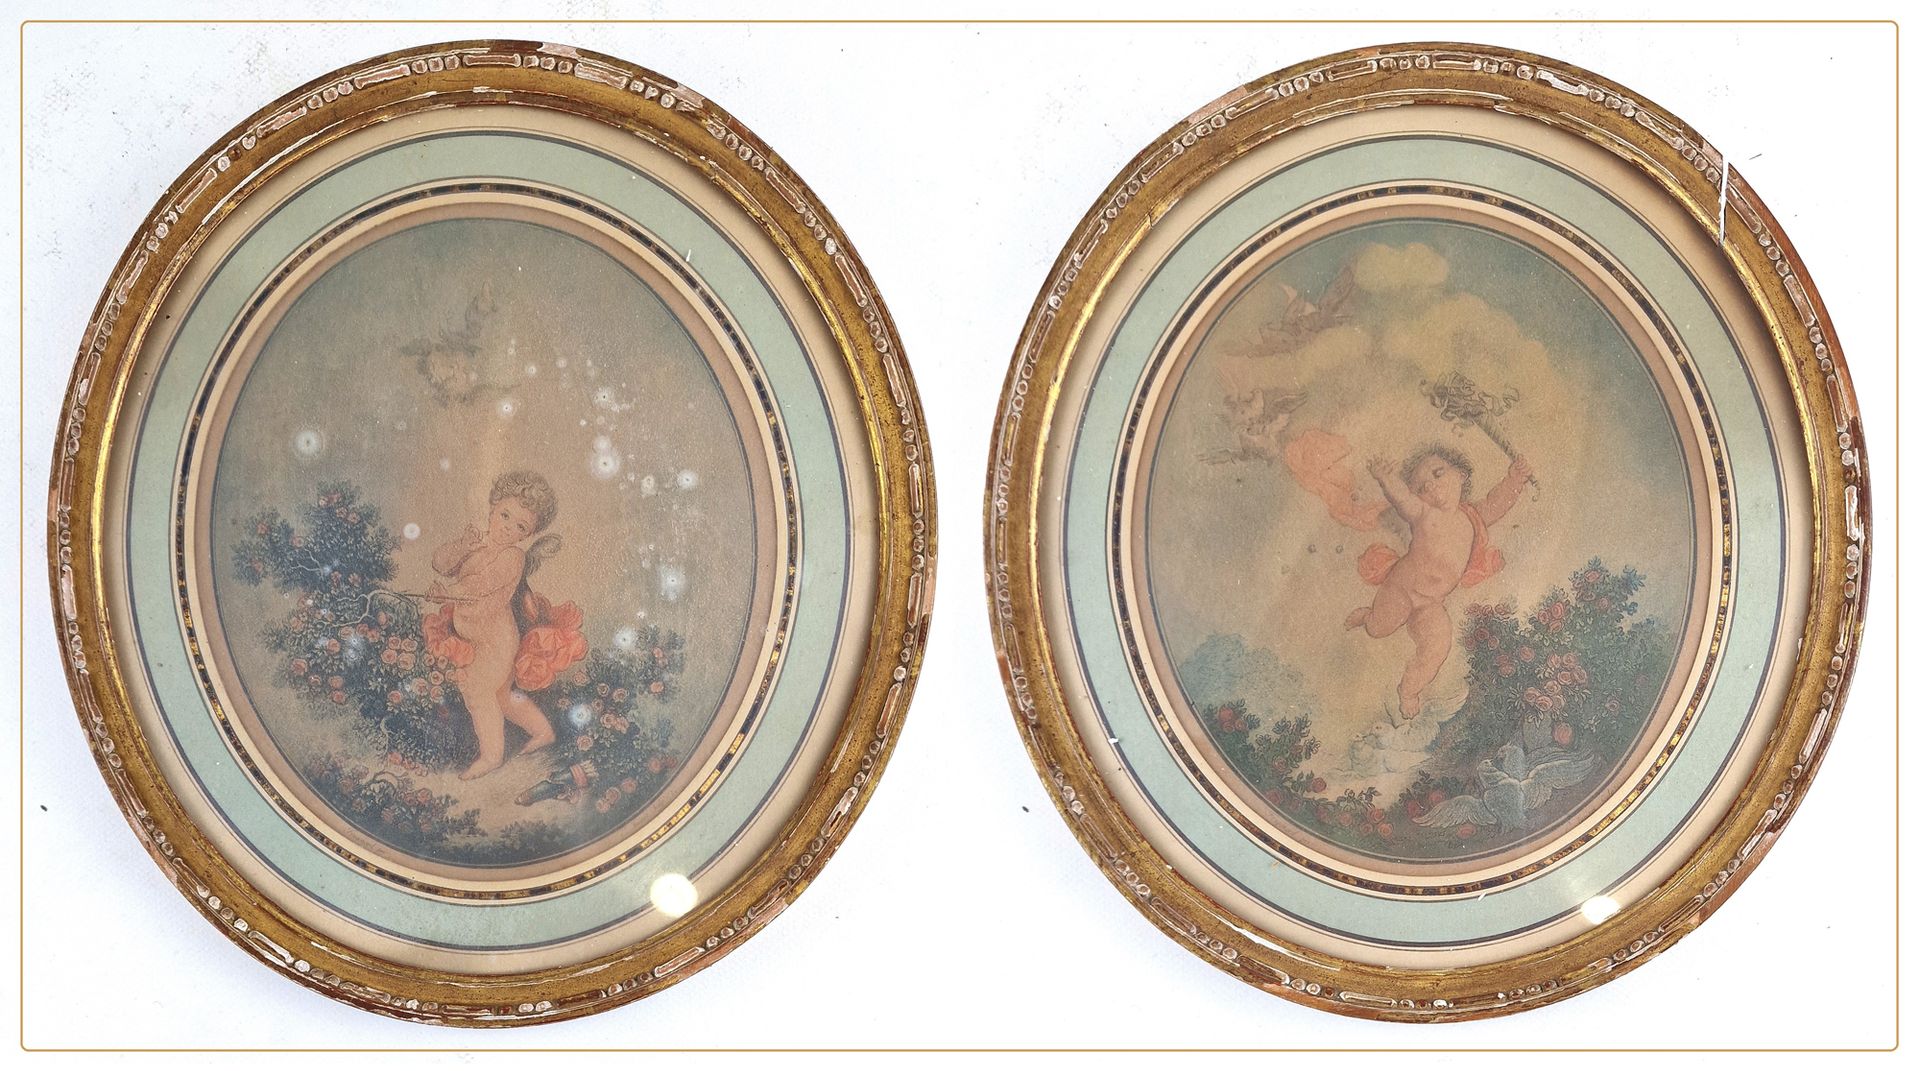 D'ARPES JEAN HONORE FRAGONARD The loves



Pair of color engravings, signed and &hellip;